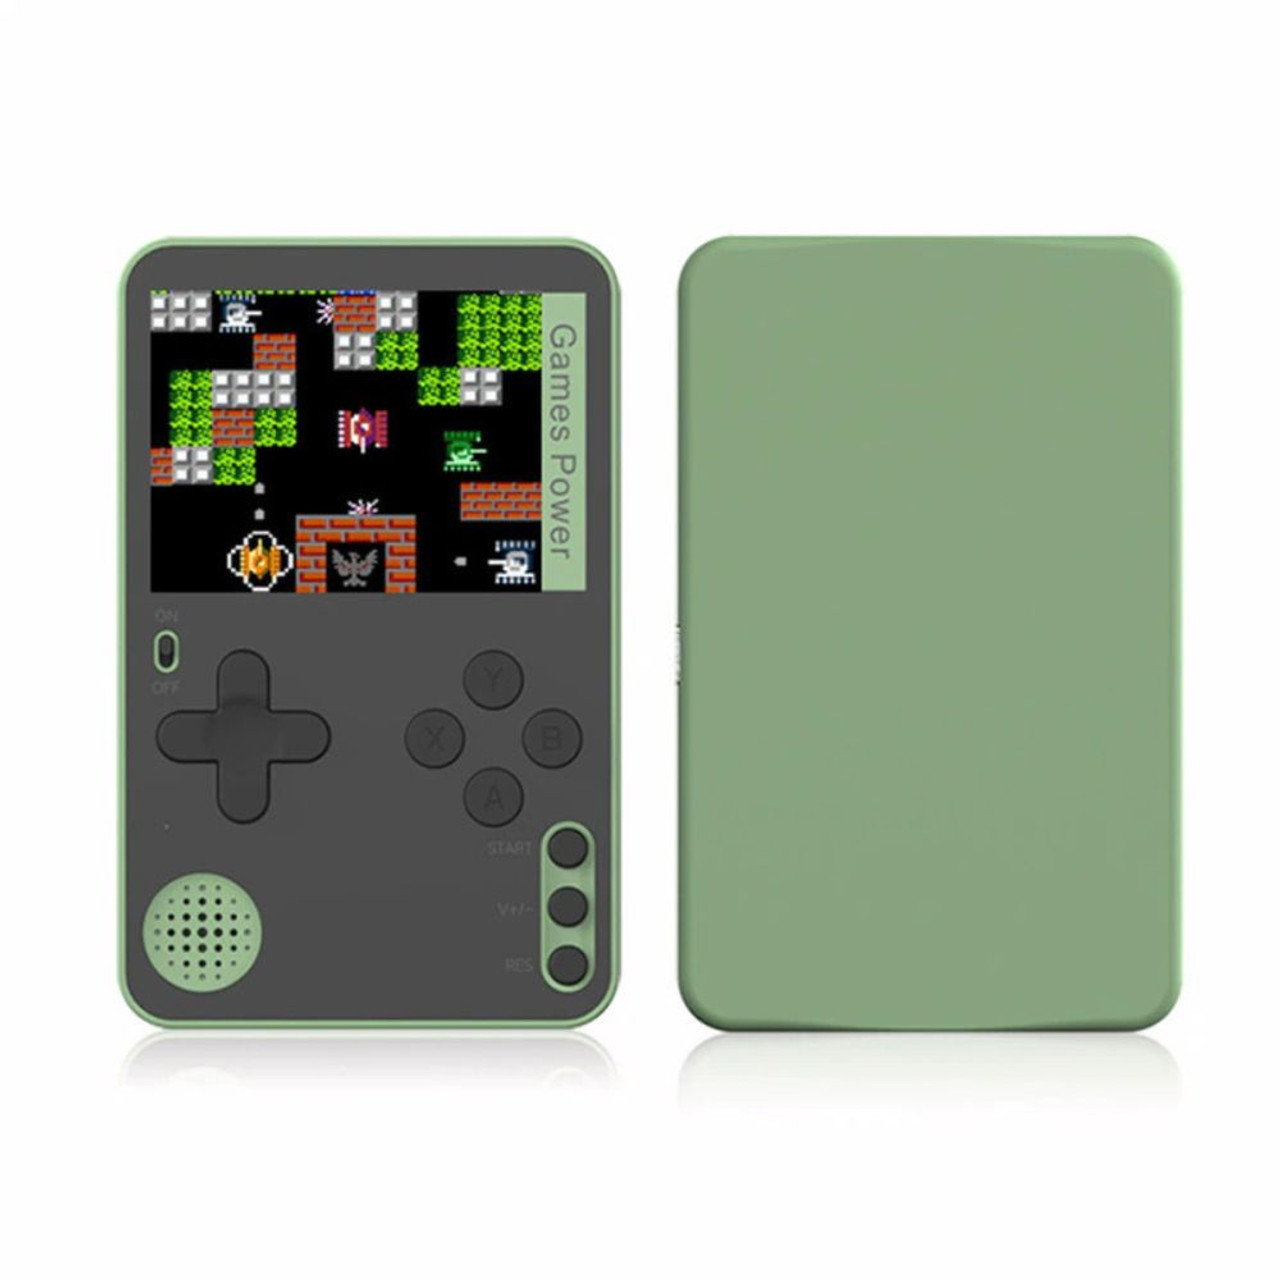 500-in-1 Mini Retro Handheld Video Game System product image